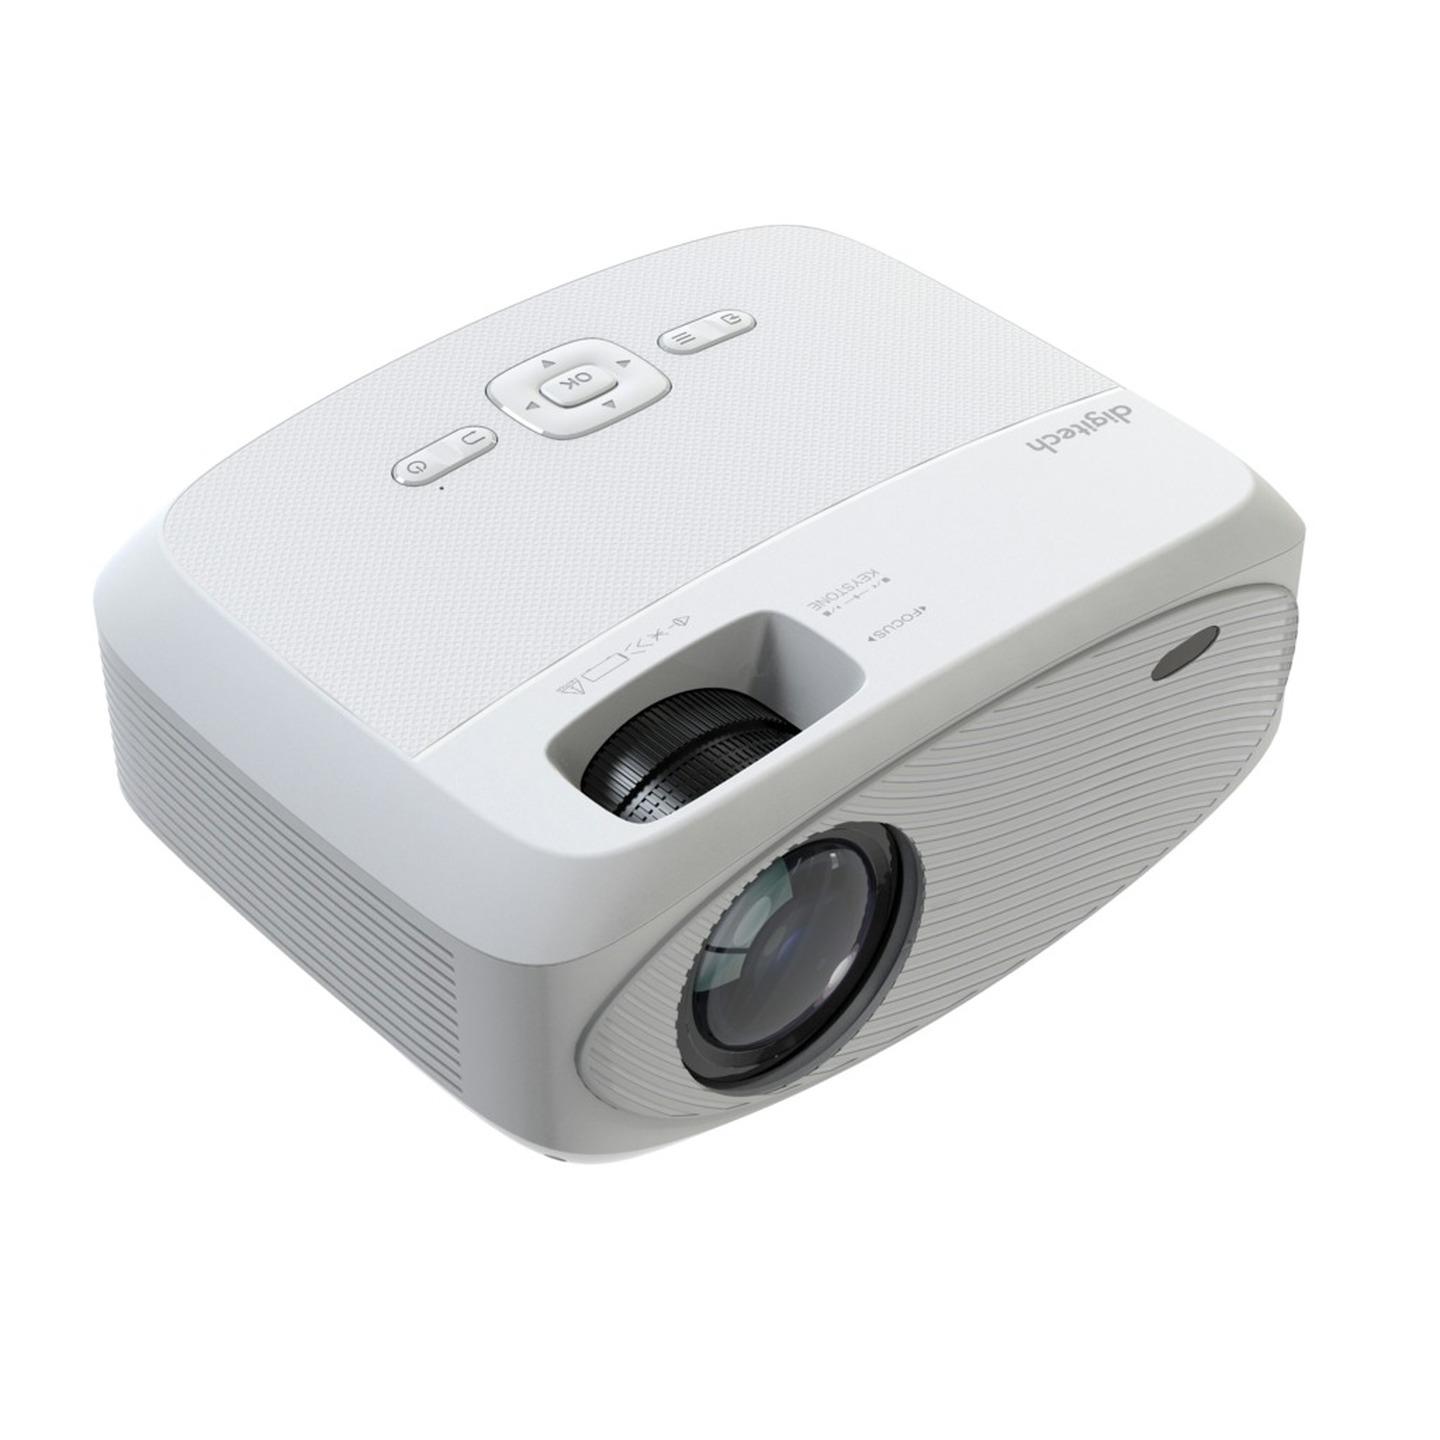 Digitech 1080p Projector with HDMI USB SD and AV Inputs with Built-in Speakers